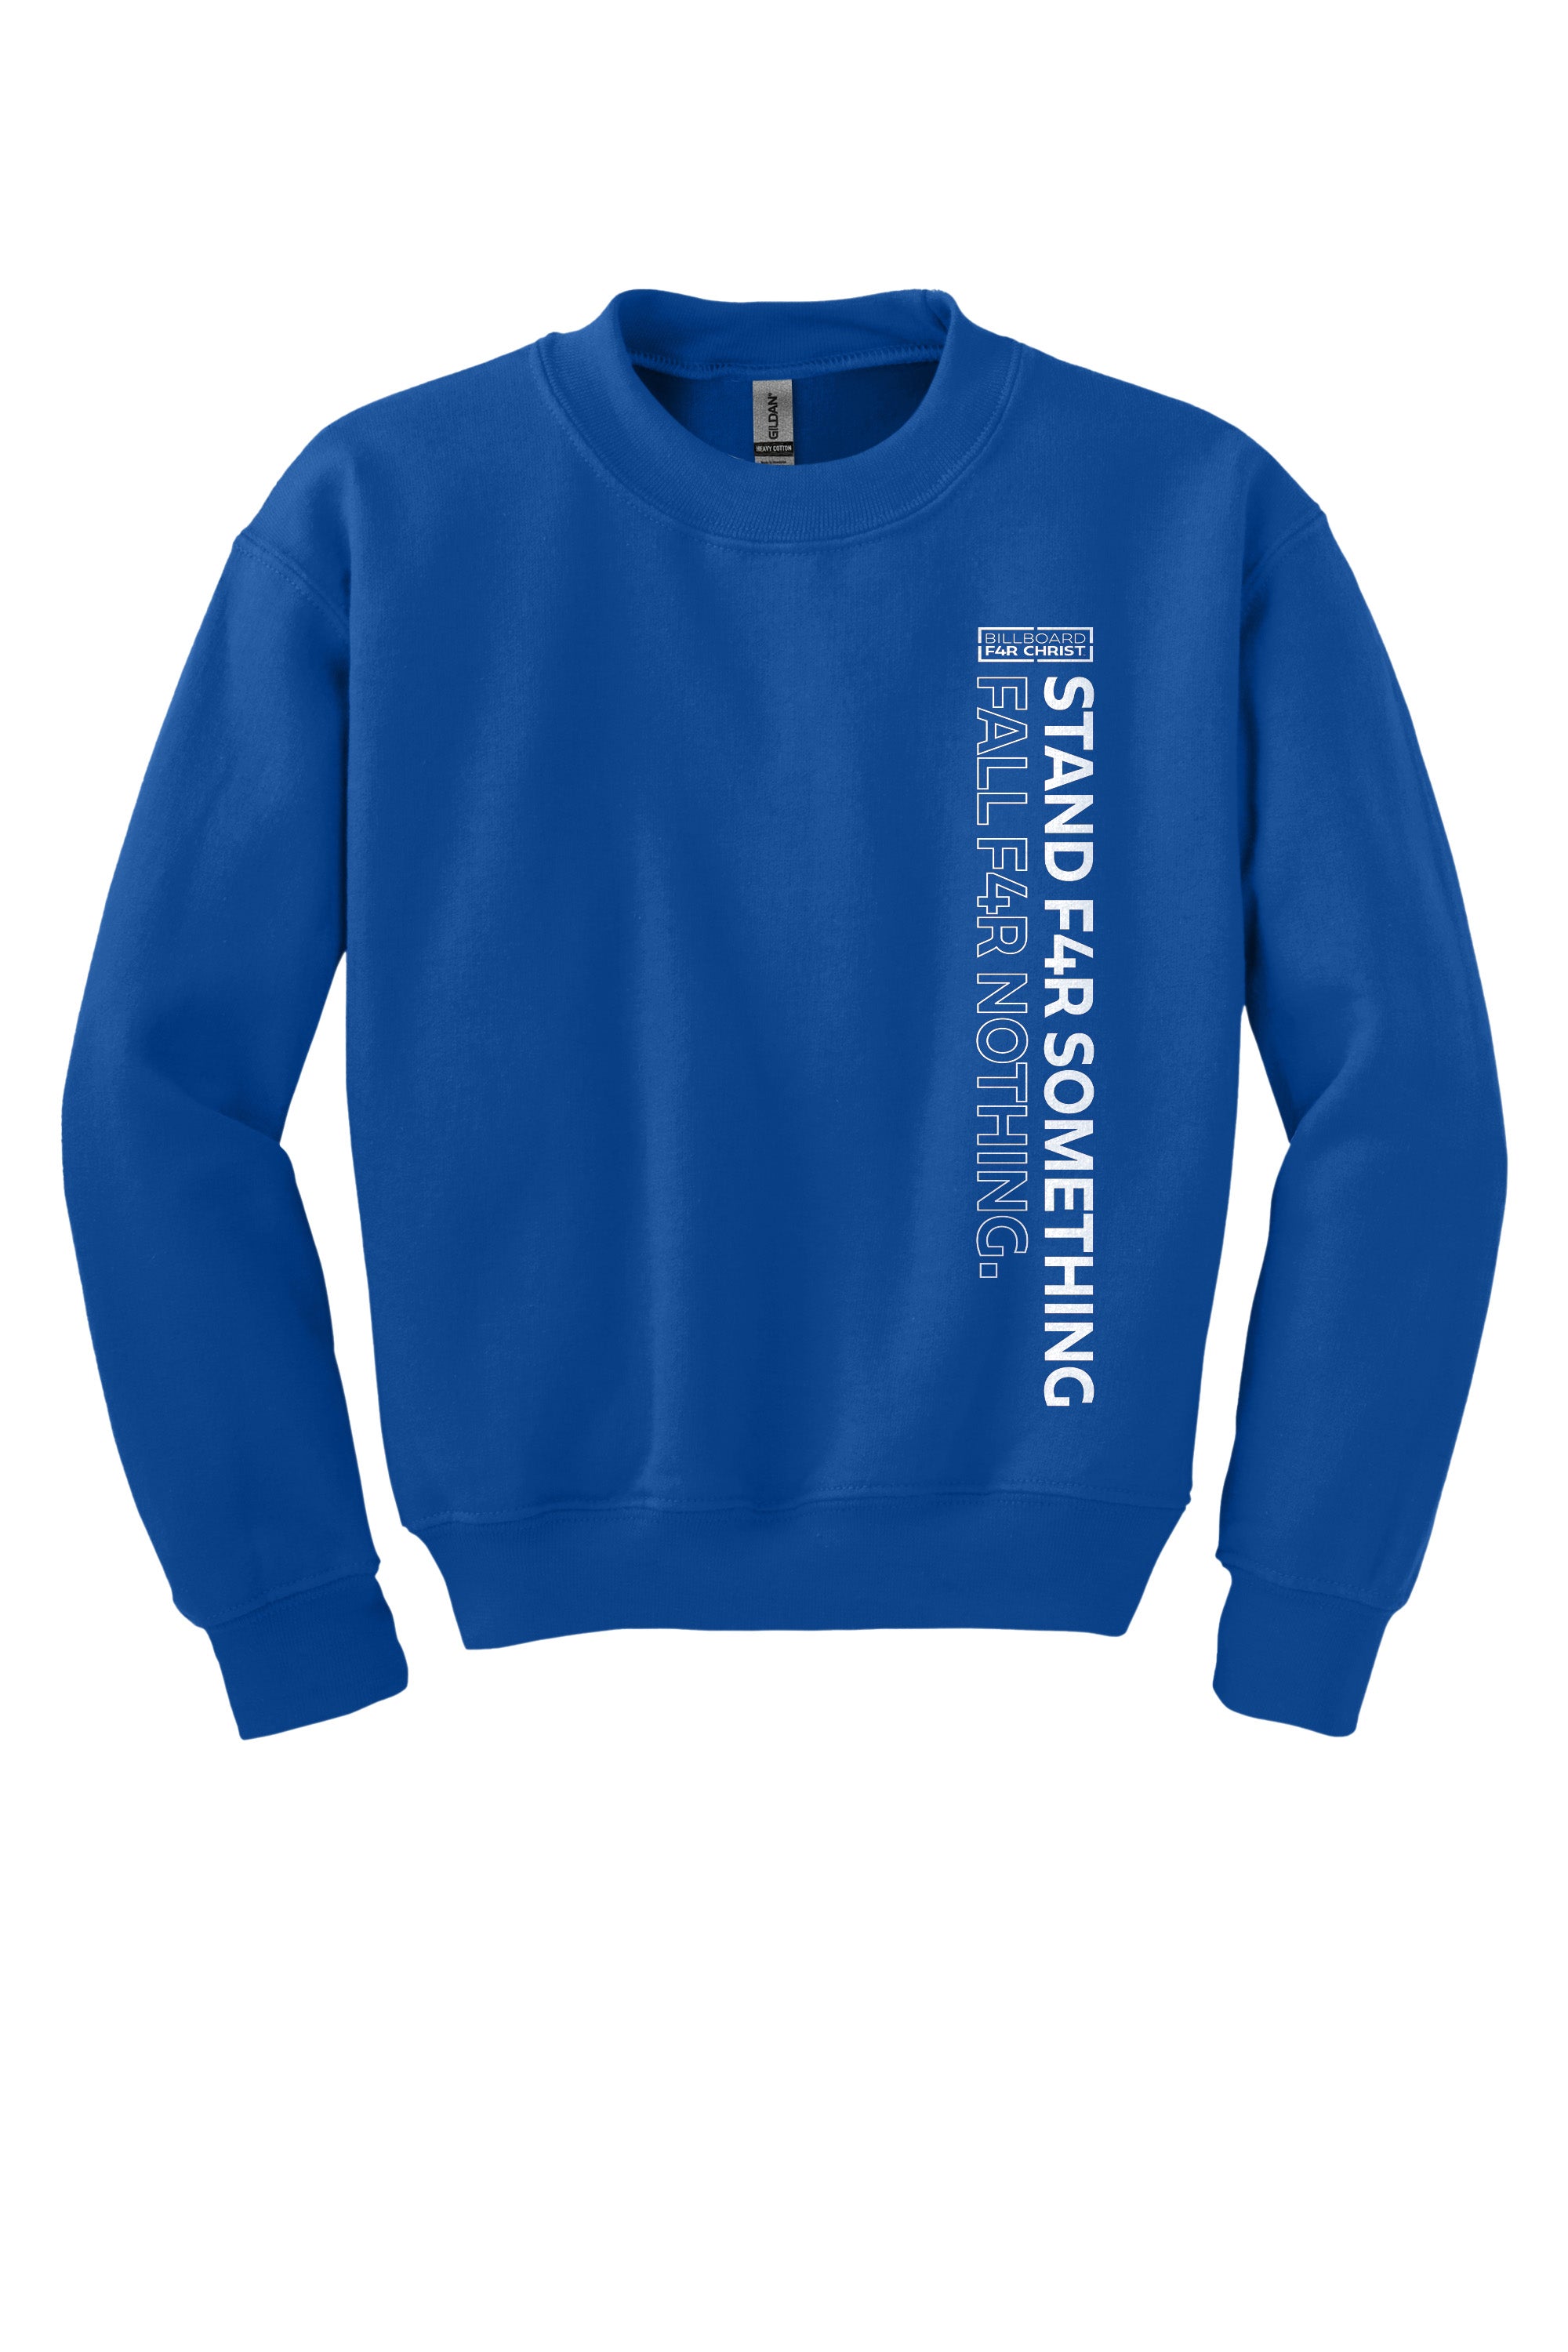 Stand F4R Something Youth Crewneck